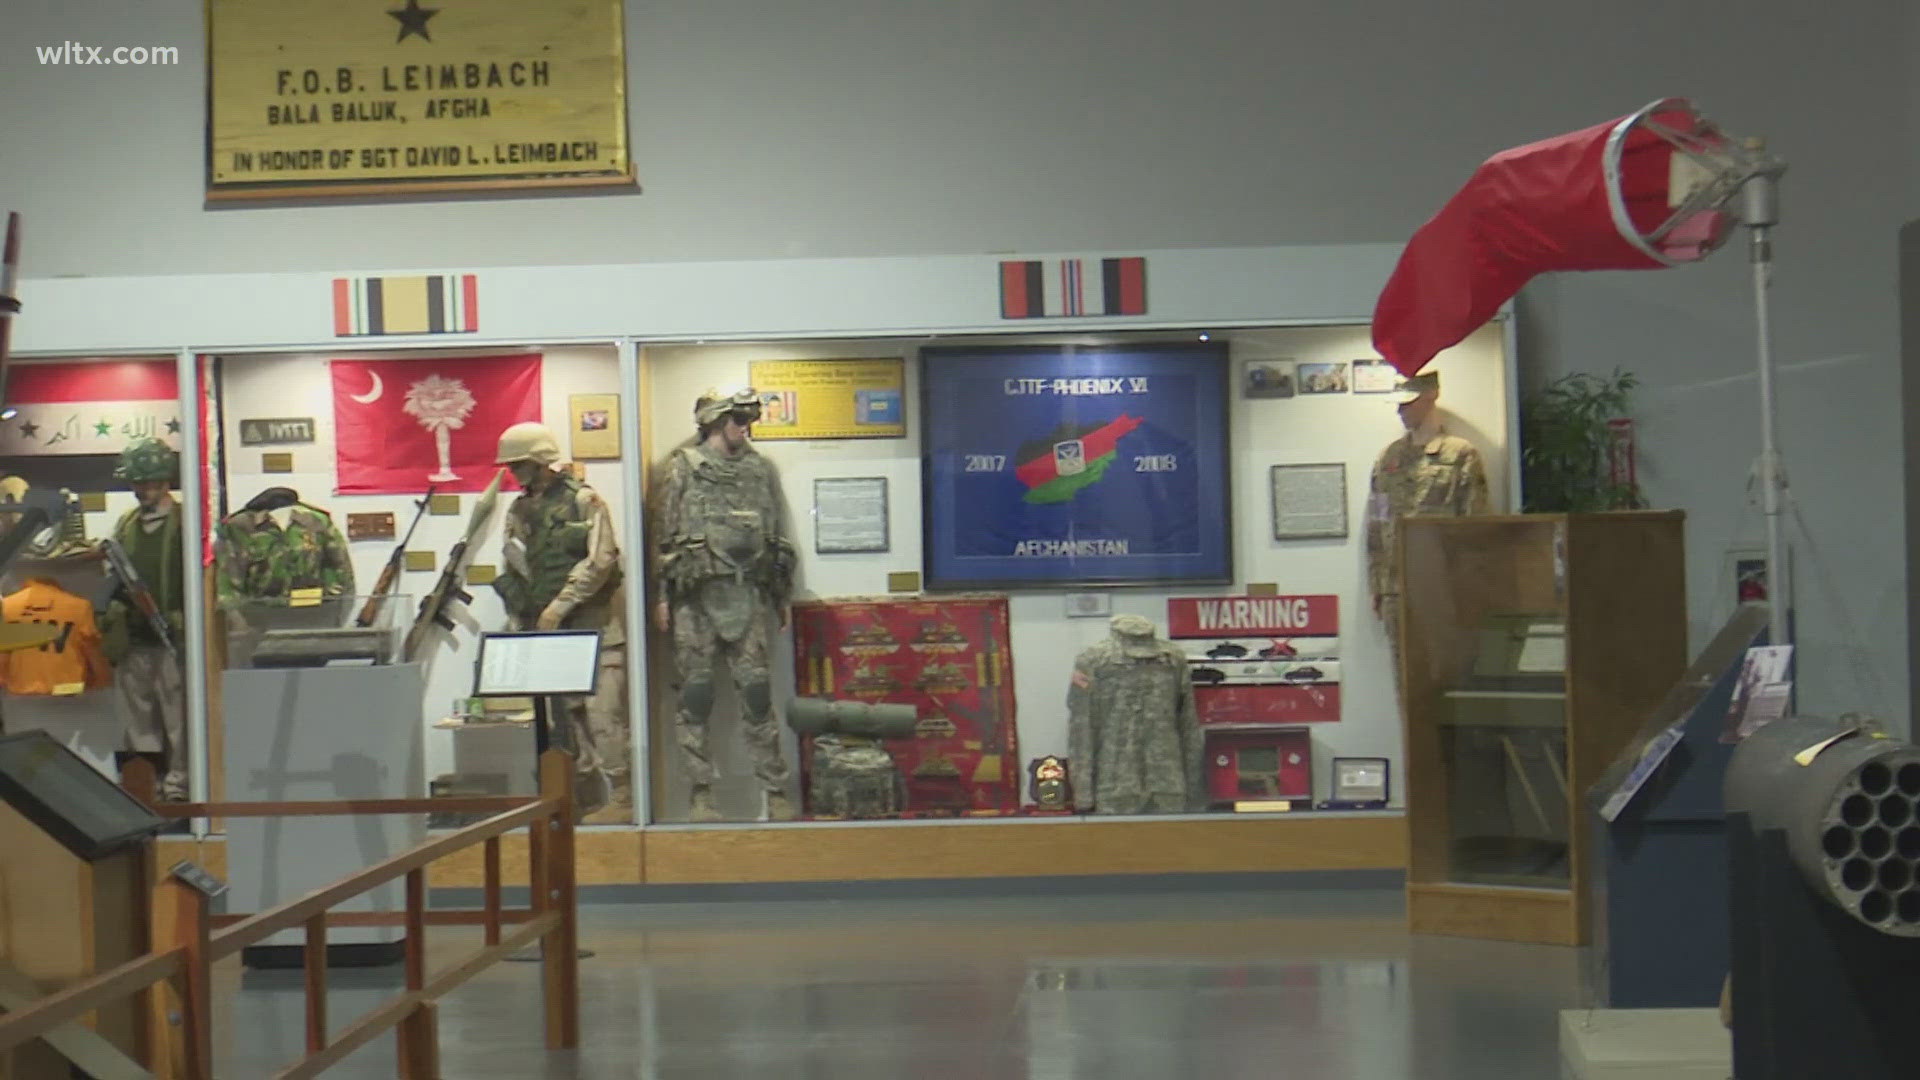 The South Carolina Military Museum is a free exhibit that showcases personal artifacts of history from those who served our country.